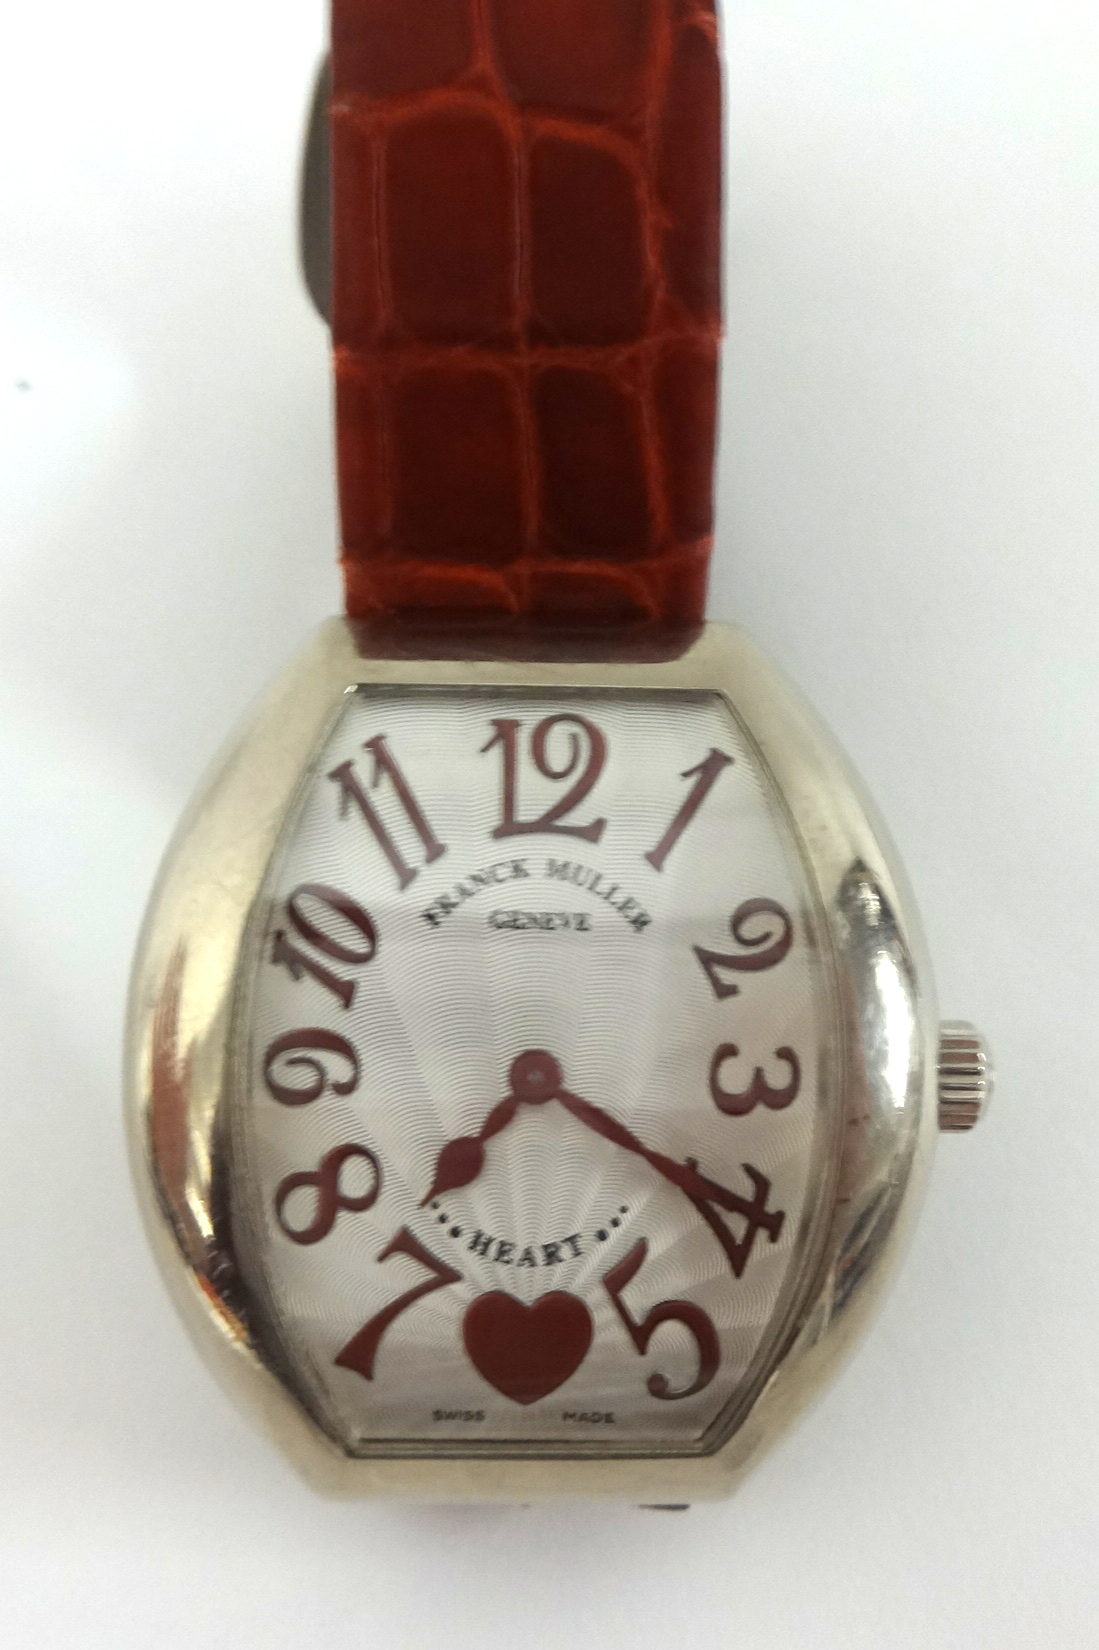 A fine Franck Muller Gents wrist watch, heart design with certificate dated 2009 and original boxes